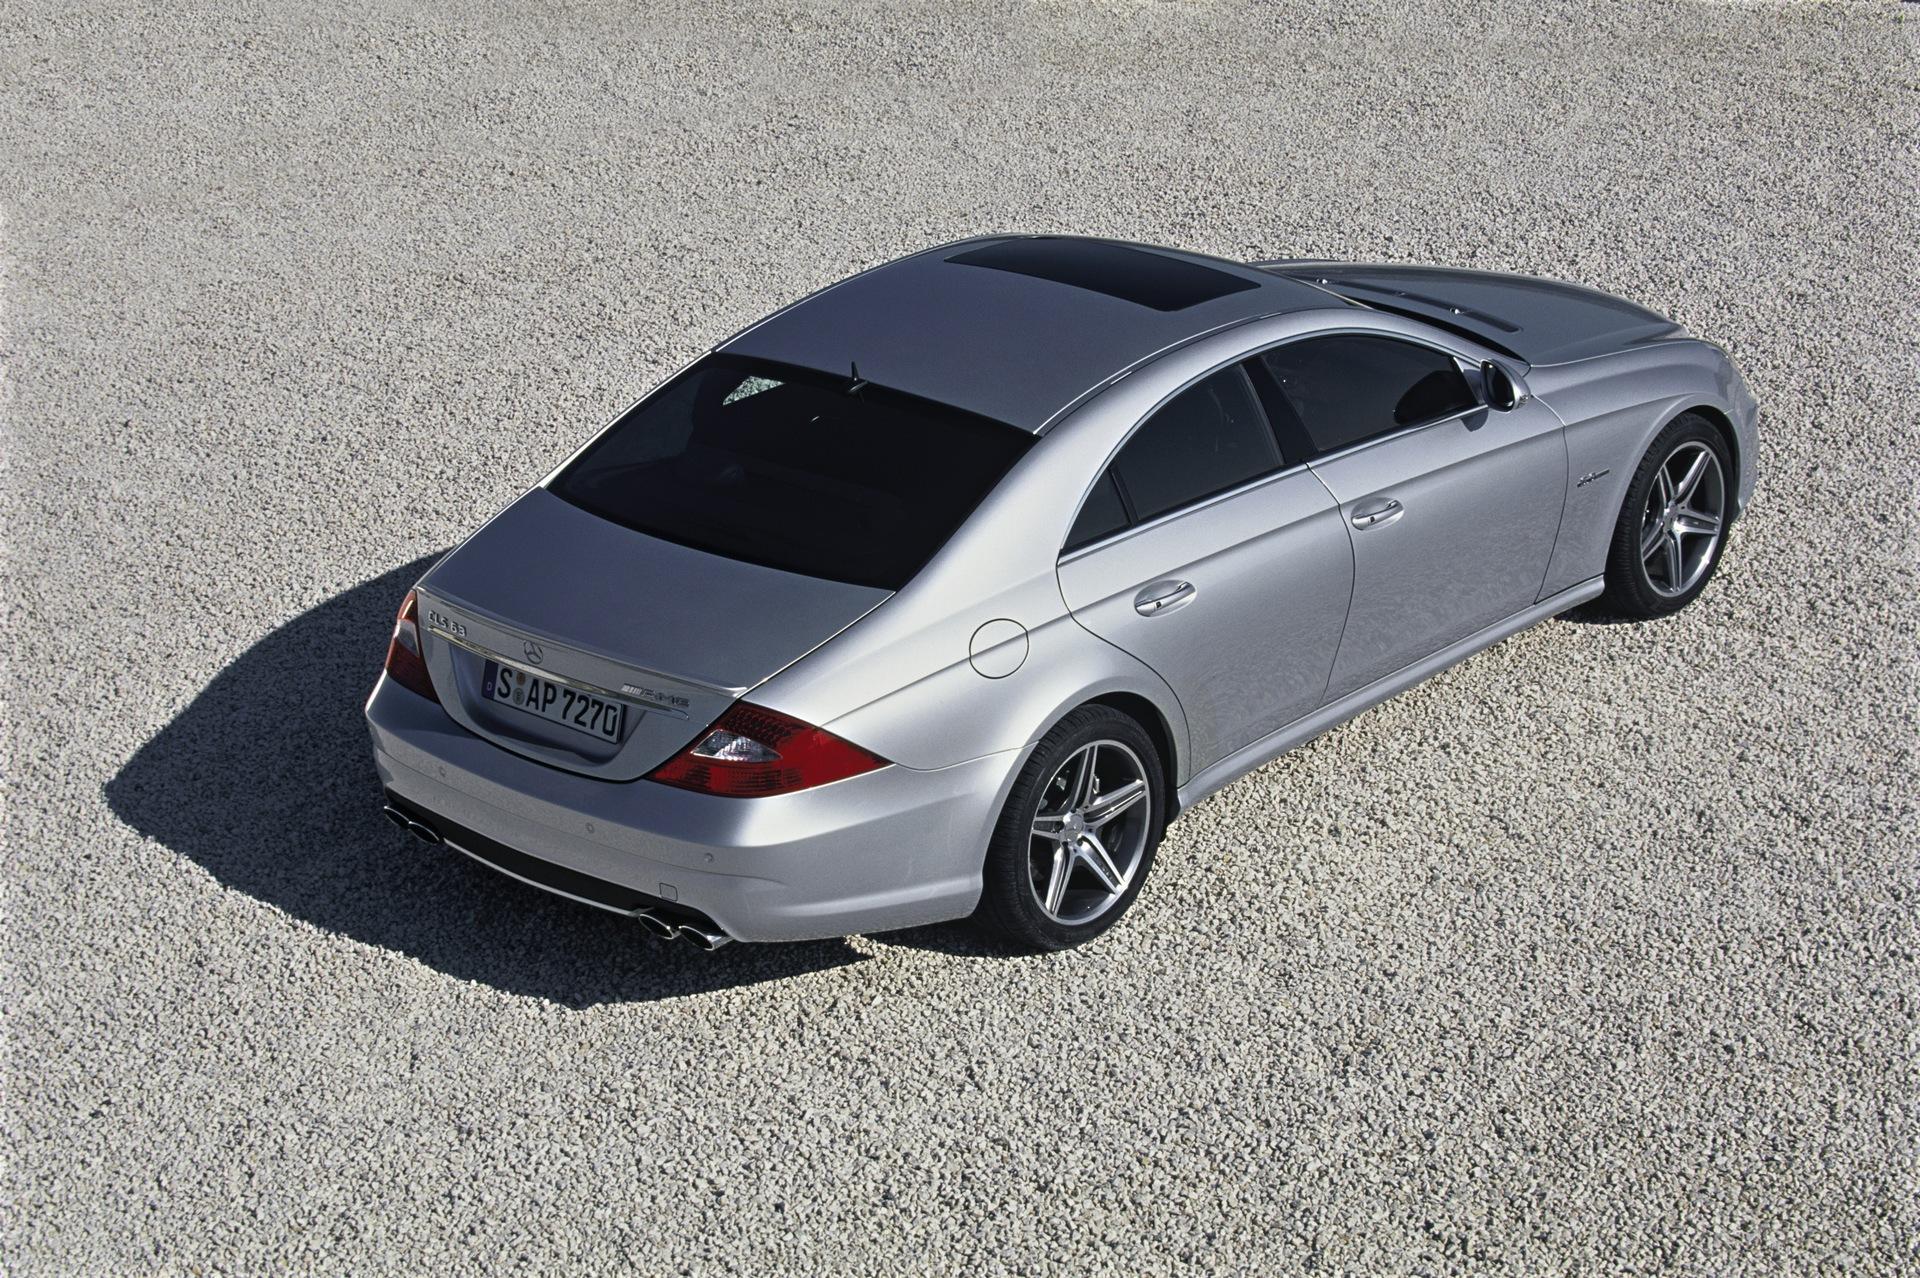 2008 Mercedes-Benz CLS Class Image. Photo 21 of 67